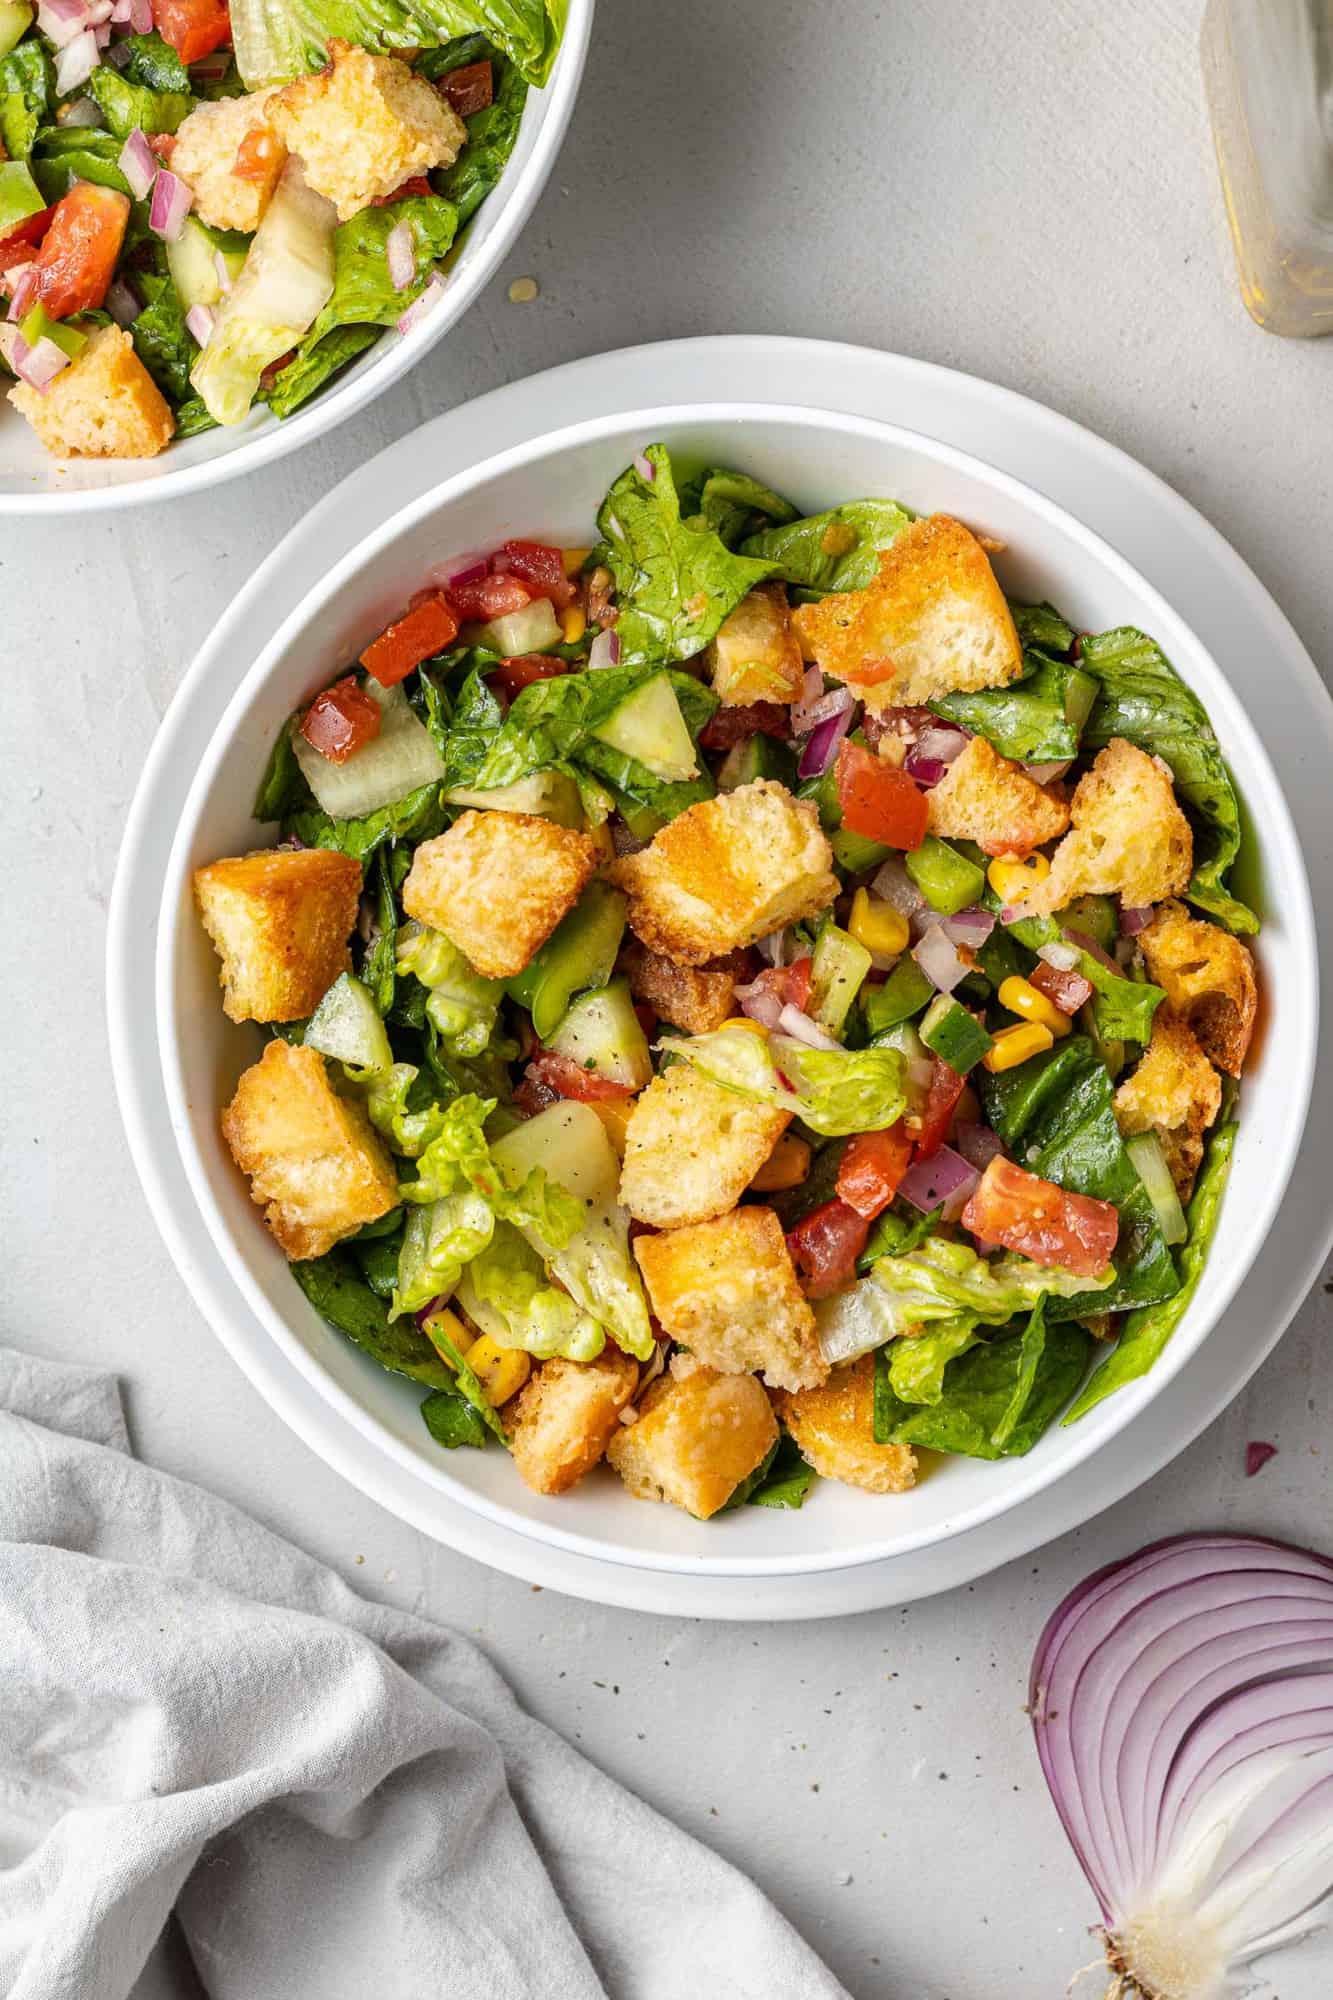 Overhead view of green salad with croutons in a white bowl.